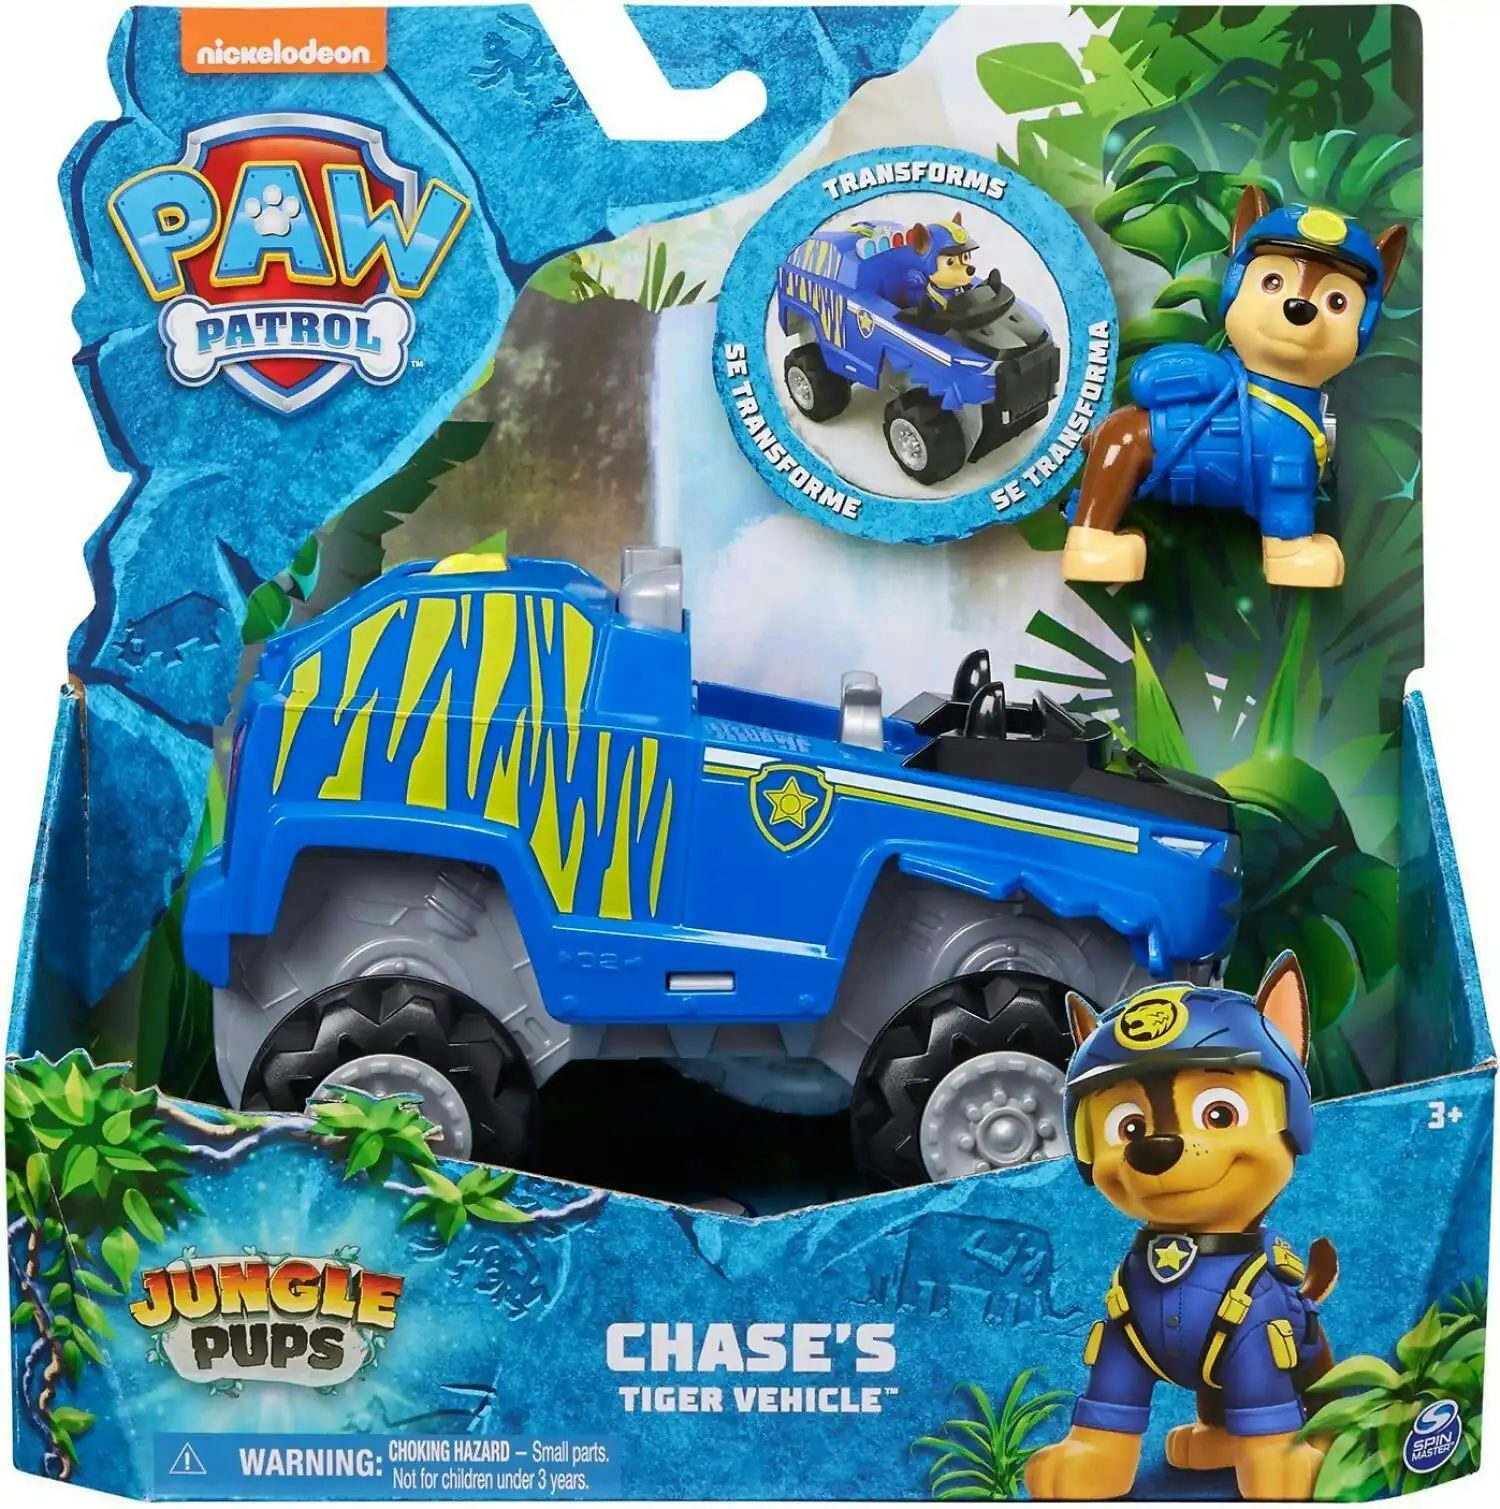 Paw Patrol - Jungle Pups Chase's Tiger Vehicle - Spin Master